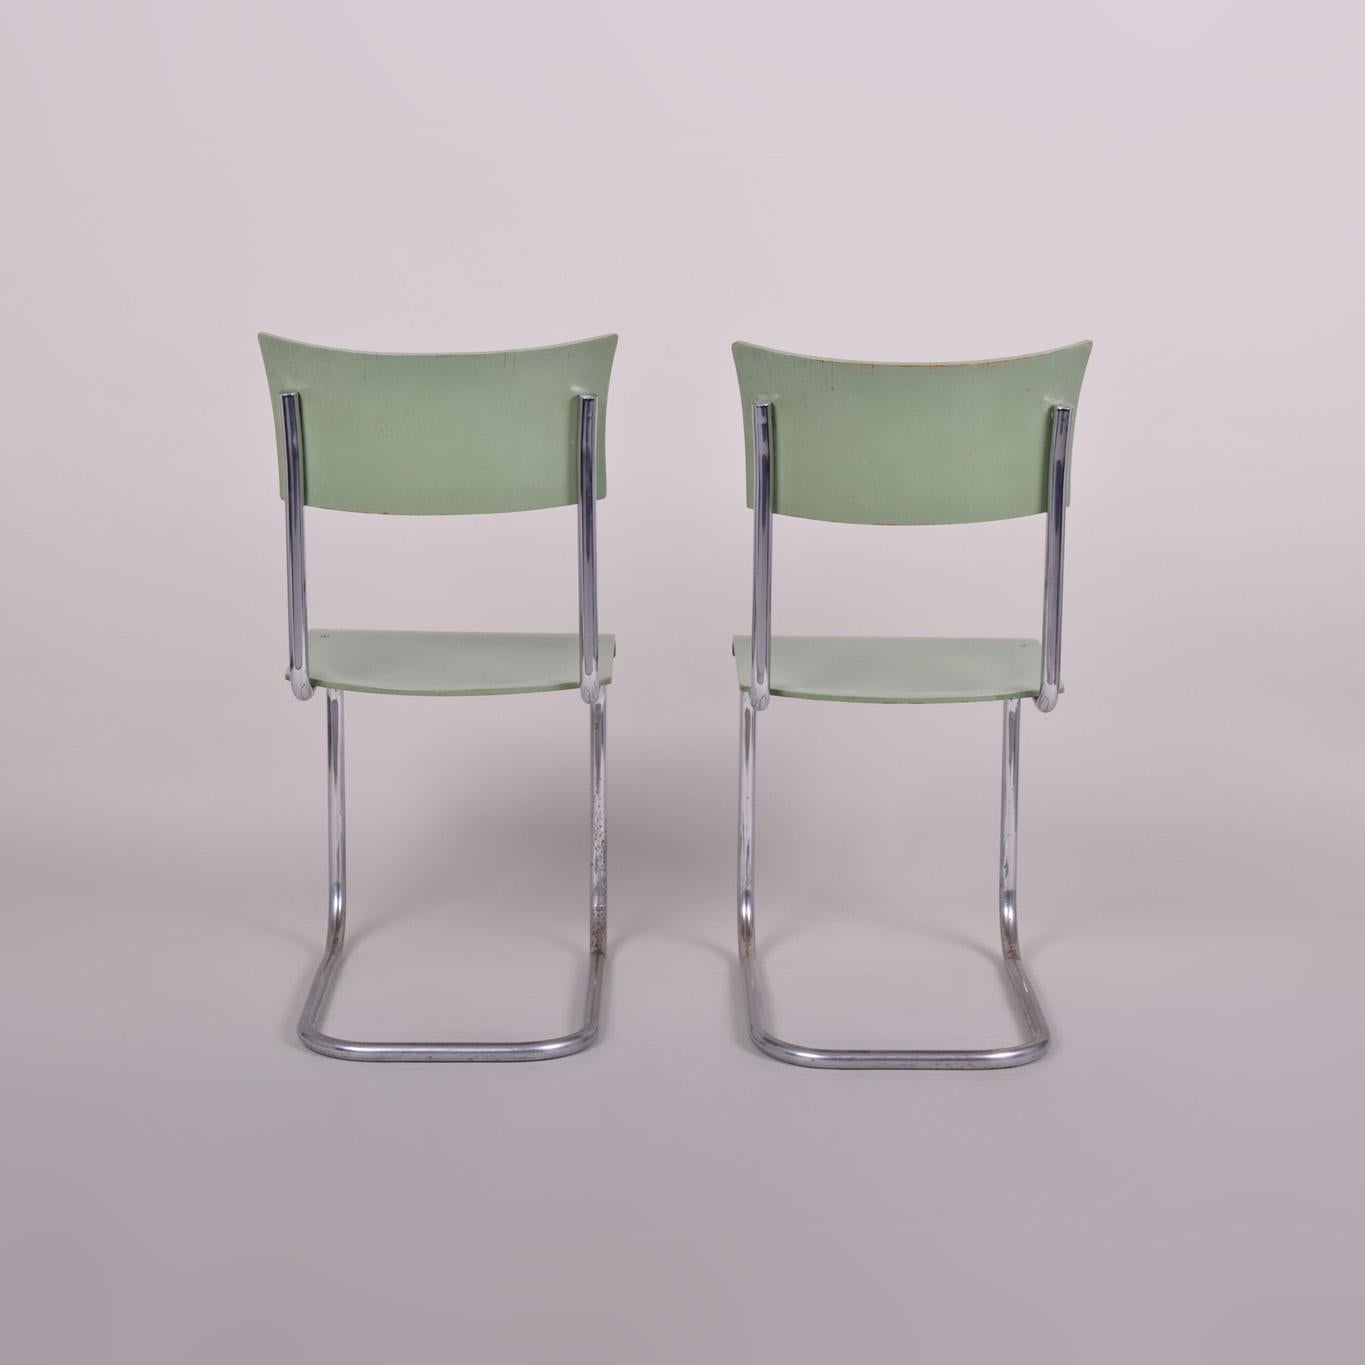 Mid-20th Century Pair of Green Bauhaus Chairs Made in 1930s Czechia, Made by Robert Slezák For Sale